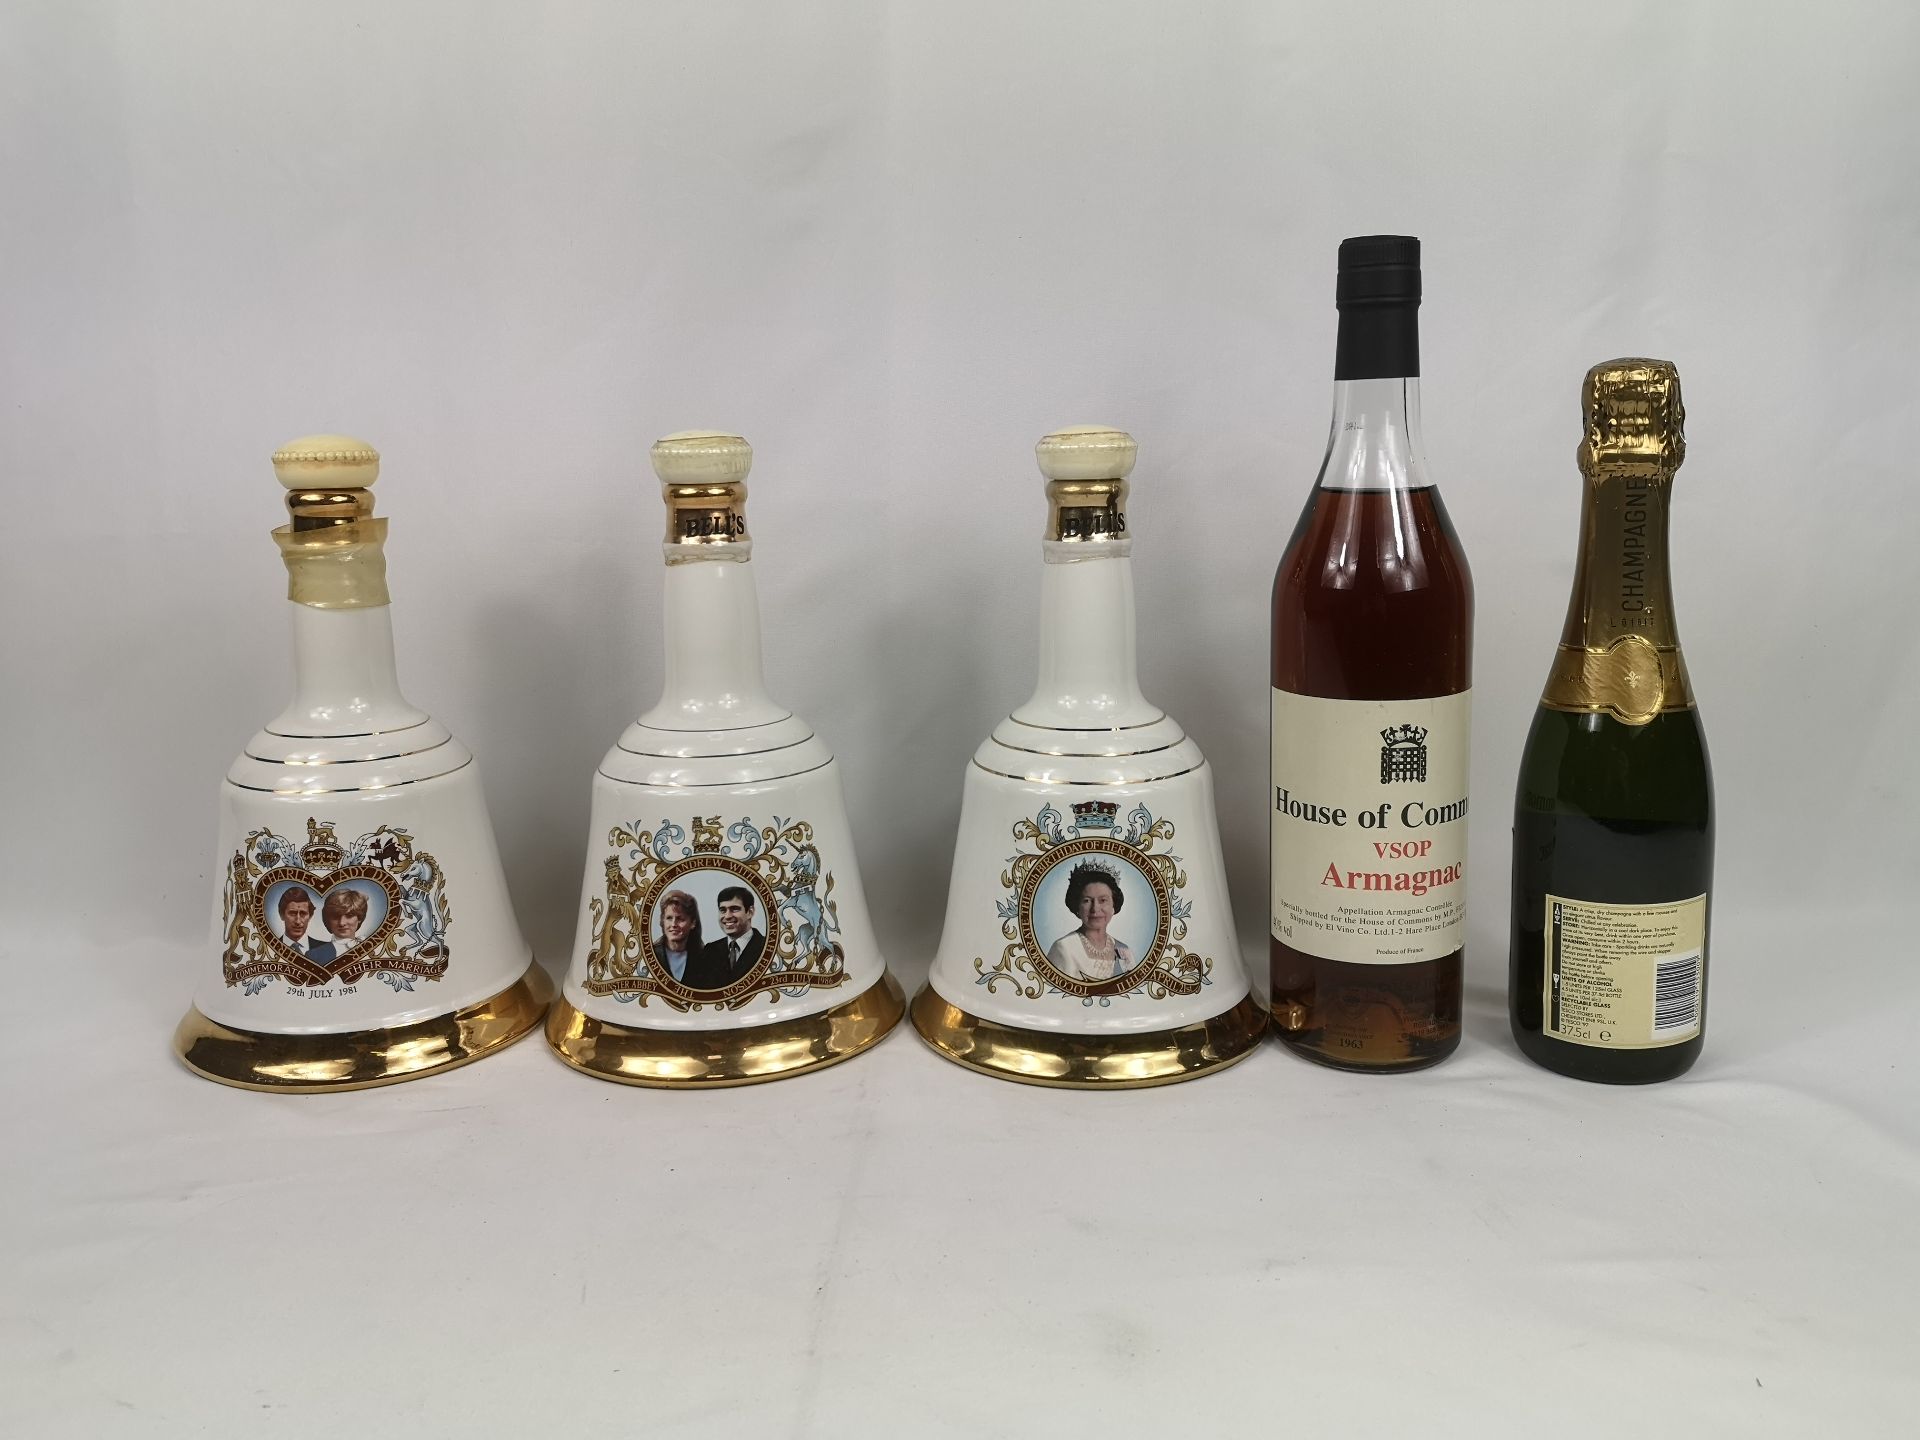 Three Bells porcelain whisky decanters, bottle of House of Commons Armagnac